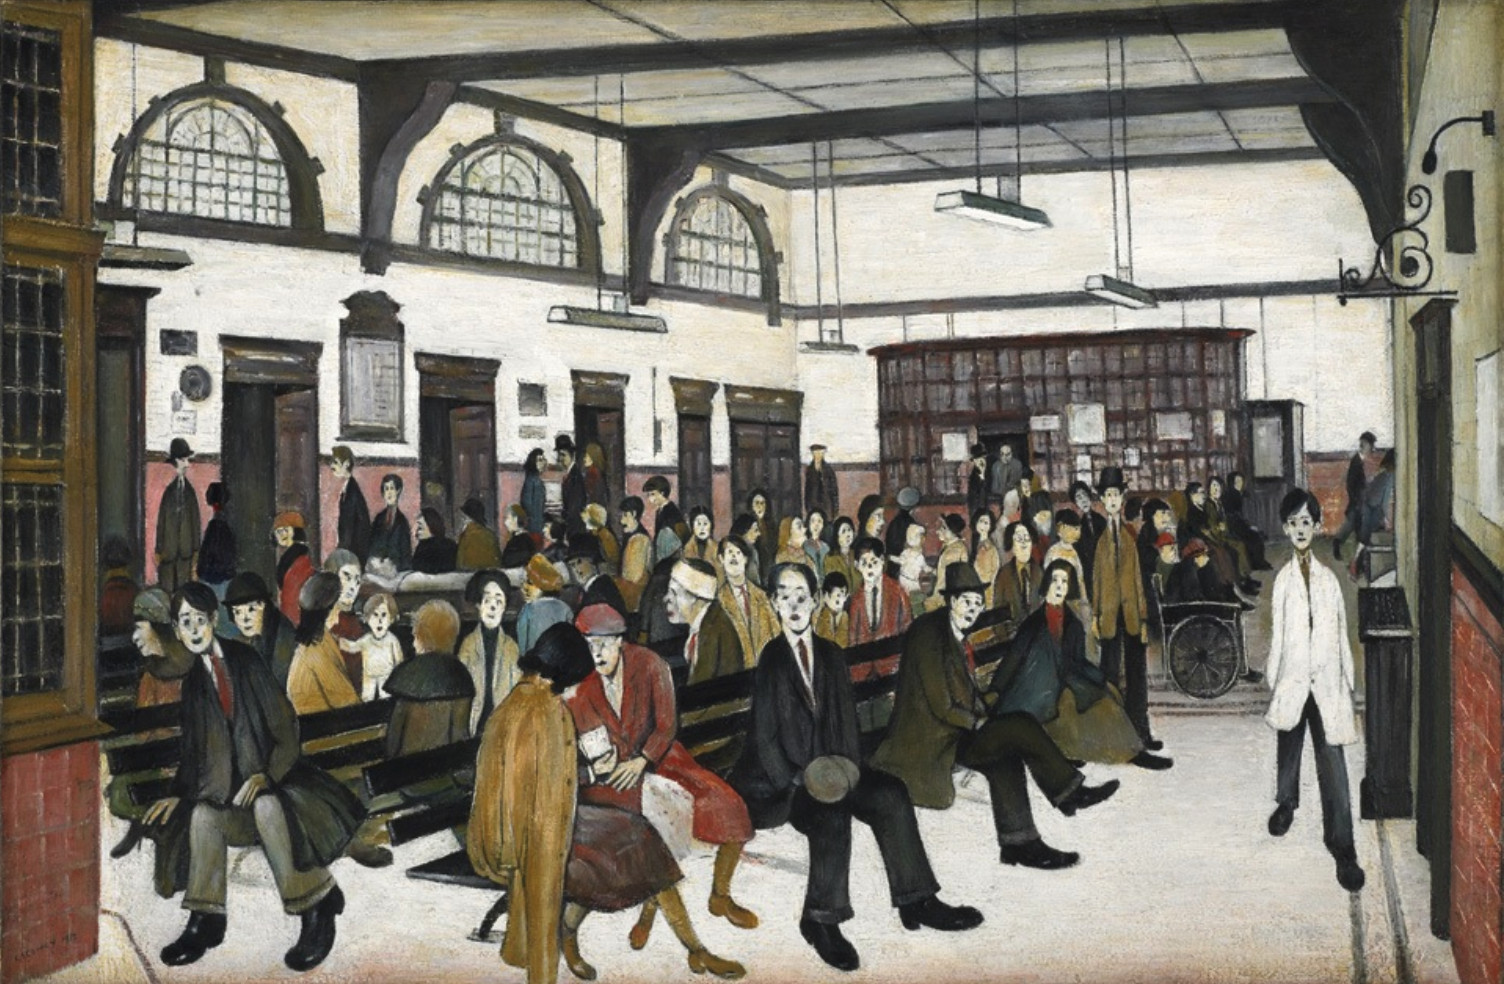 Ancoats Hospital Outpatients’ Hall (1952) by Laurence Stephen Lowry (1887 - 1976), English artist.